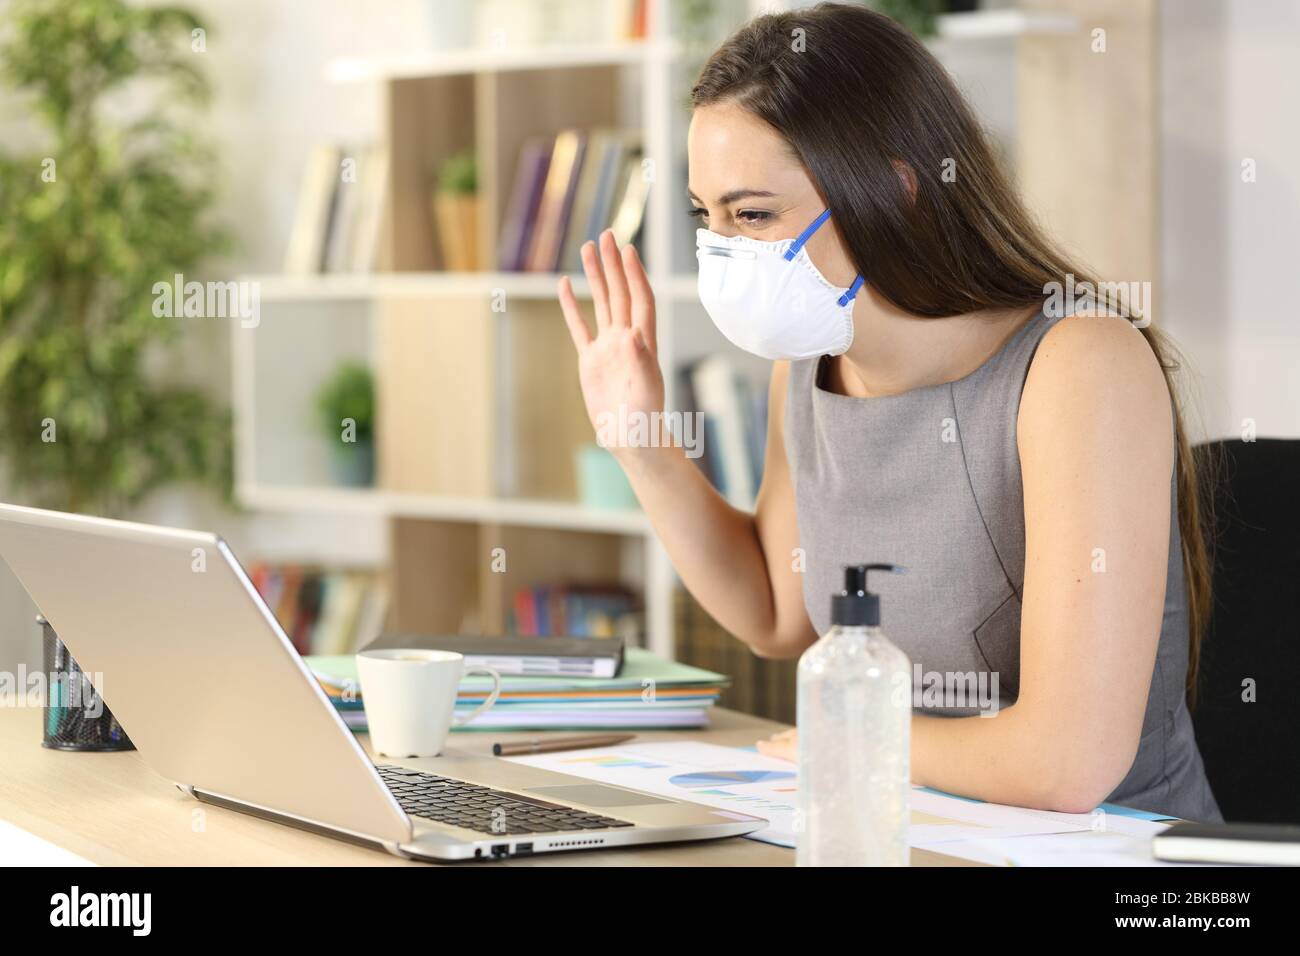 Happy entrepreneur woman greets to laptop webcam on videocall on coronavirus confinement at homeoffice Stock Photo